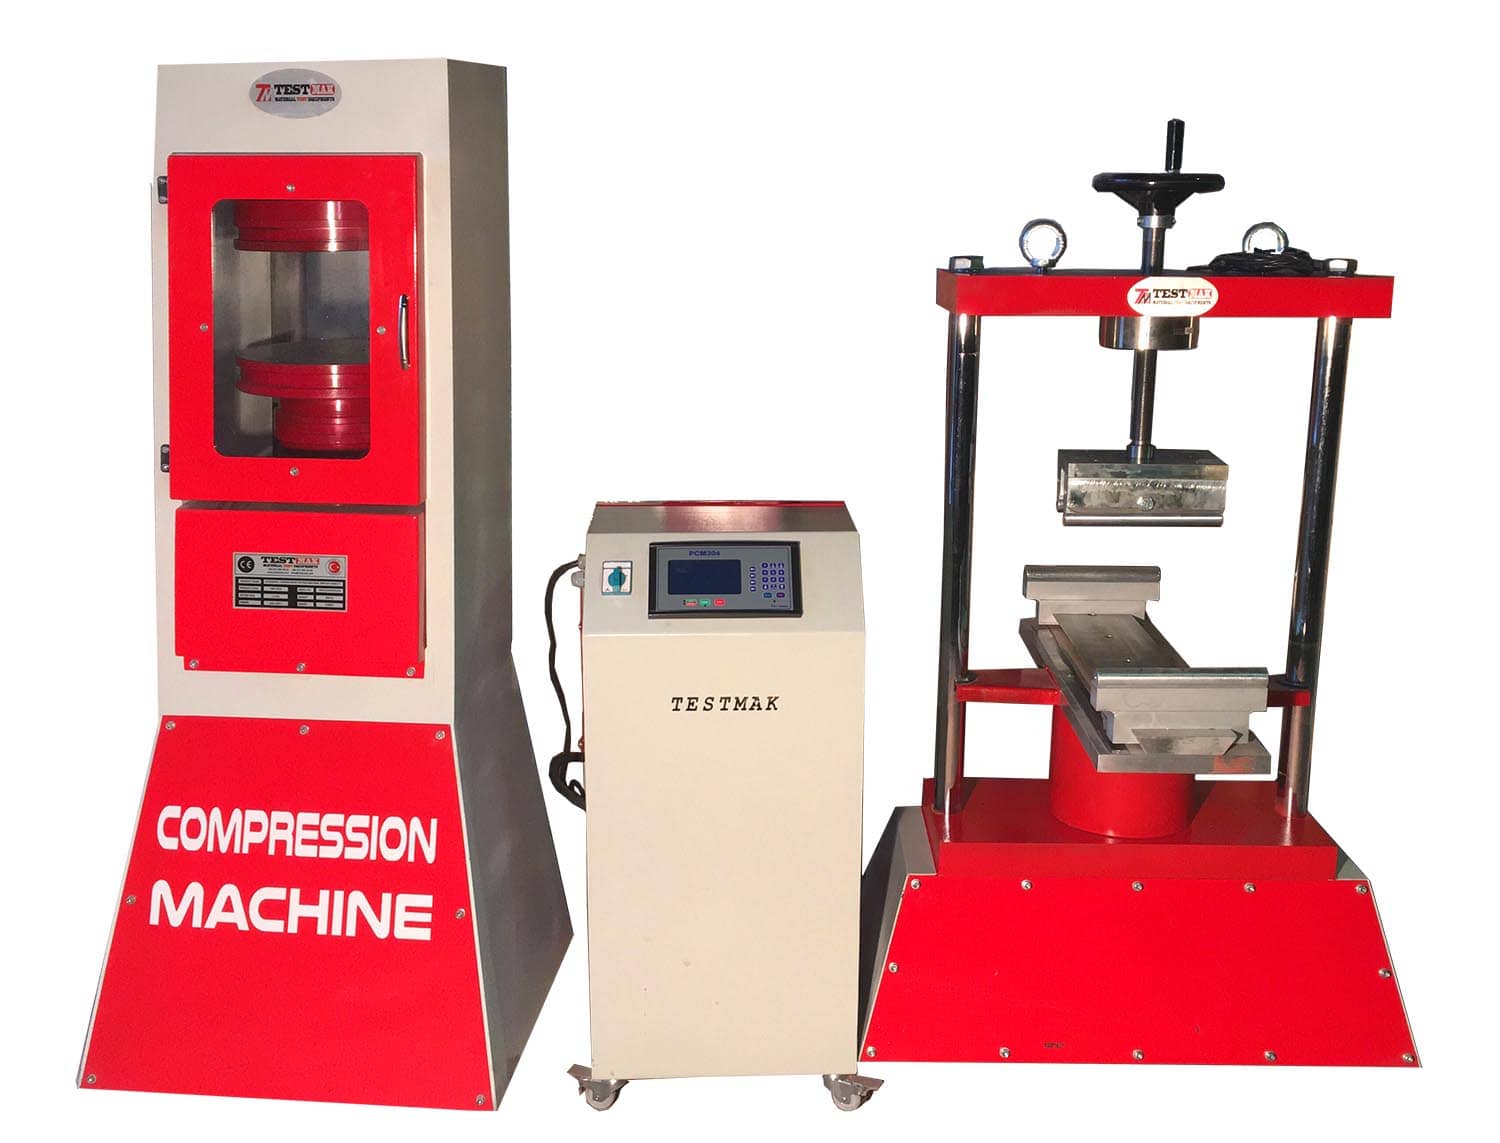 3000 kn Automatic Compression Testing Machine with 200 kn Flexural Frame - Compressive strength tests of concrete specimens  - Testmak Material Testing Equipment